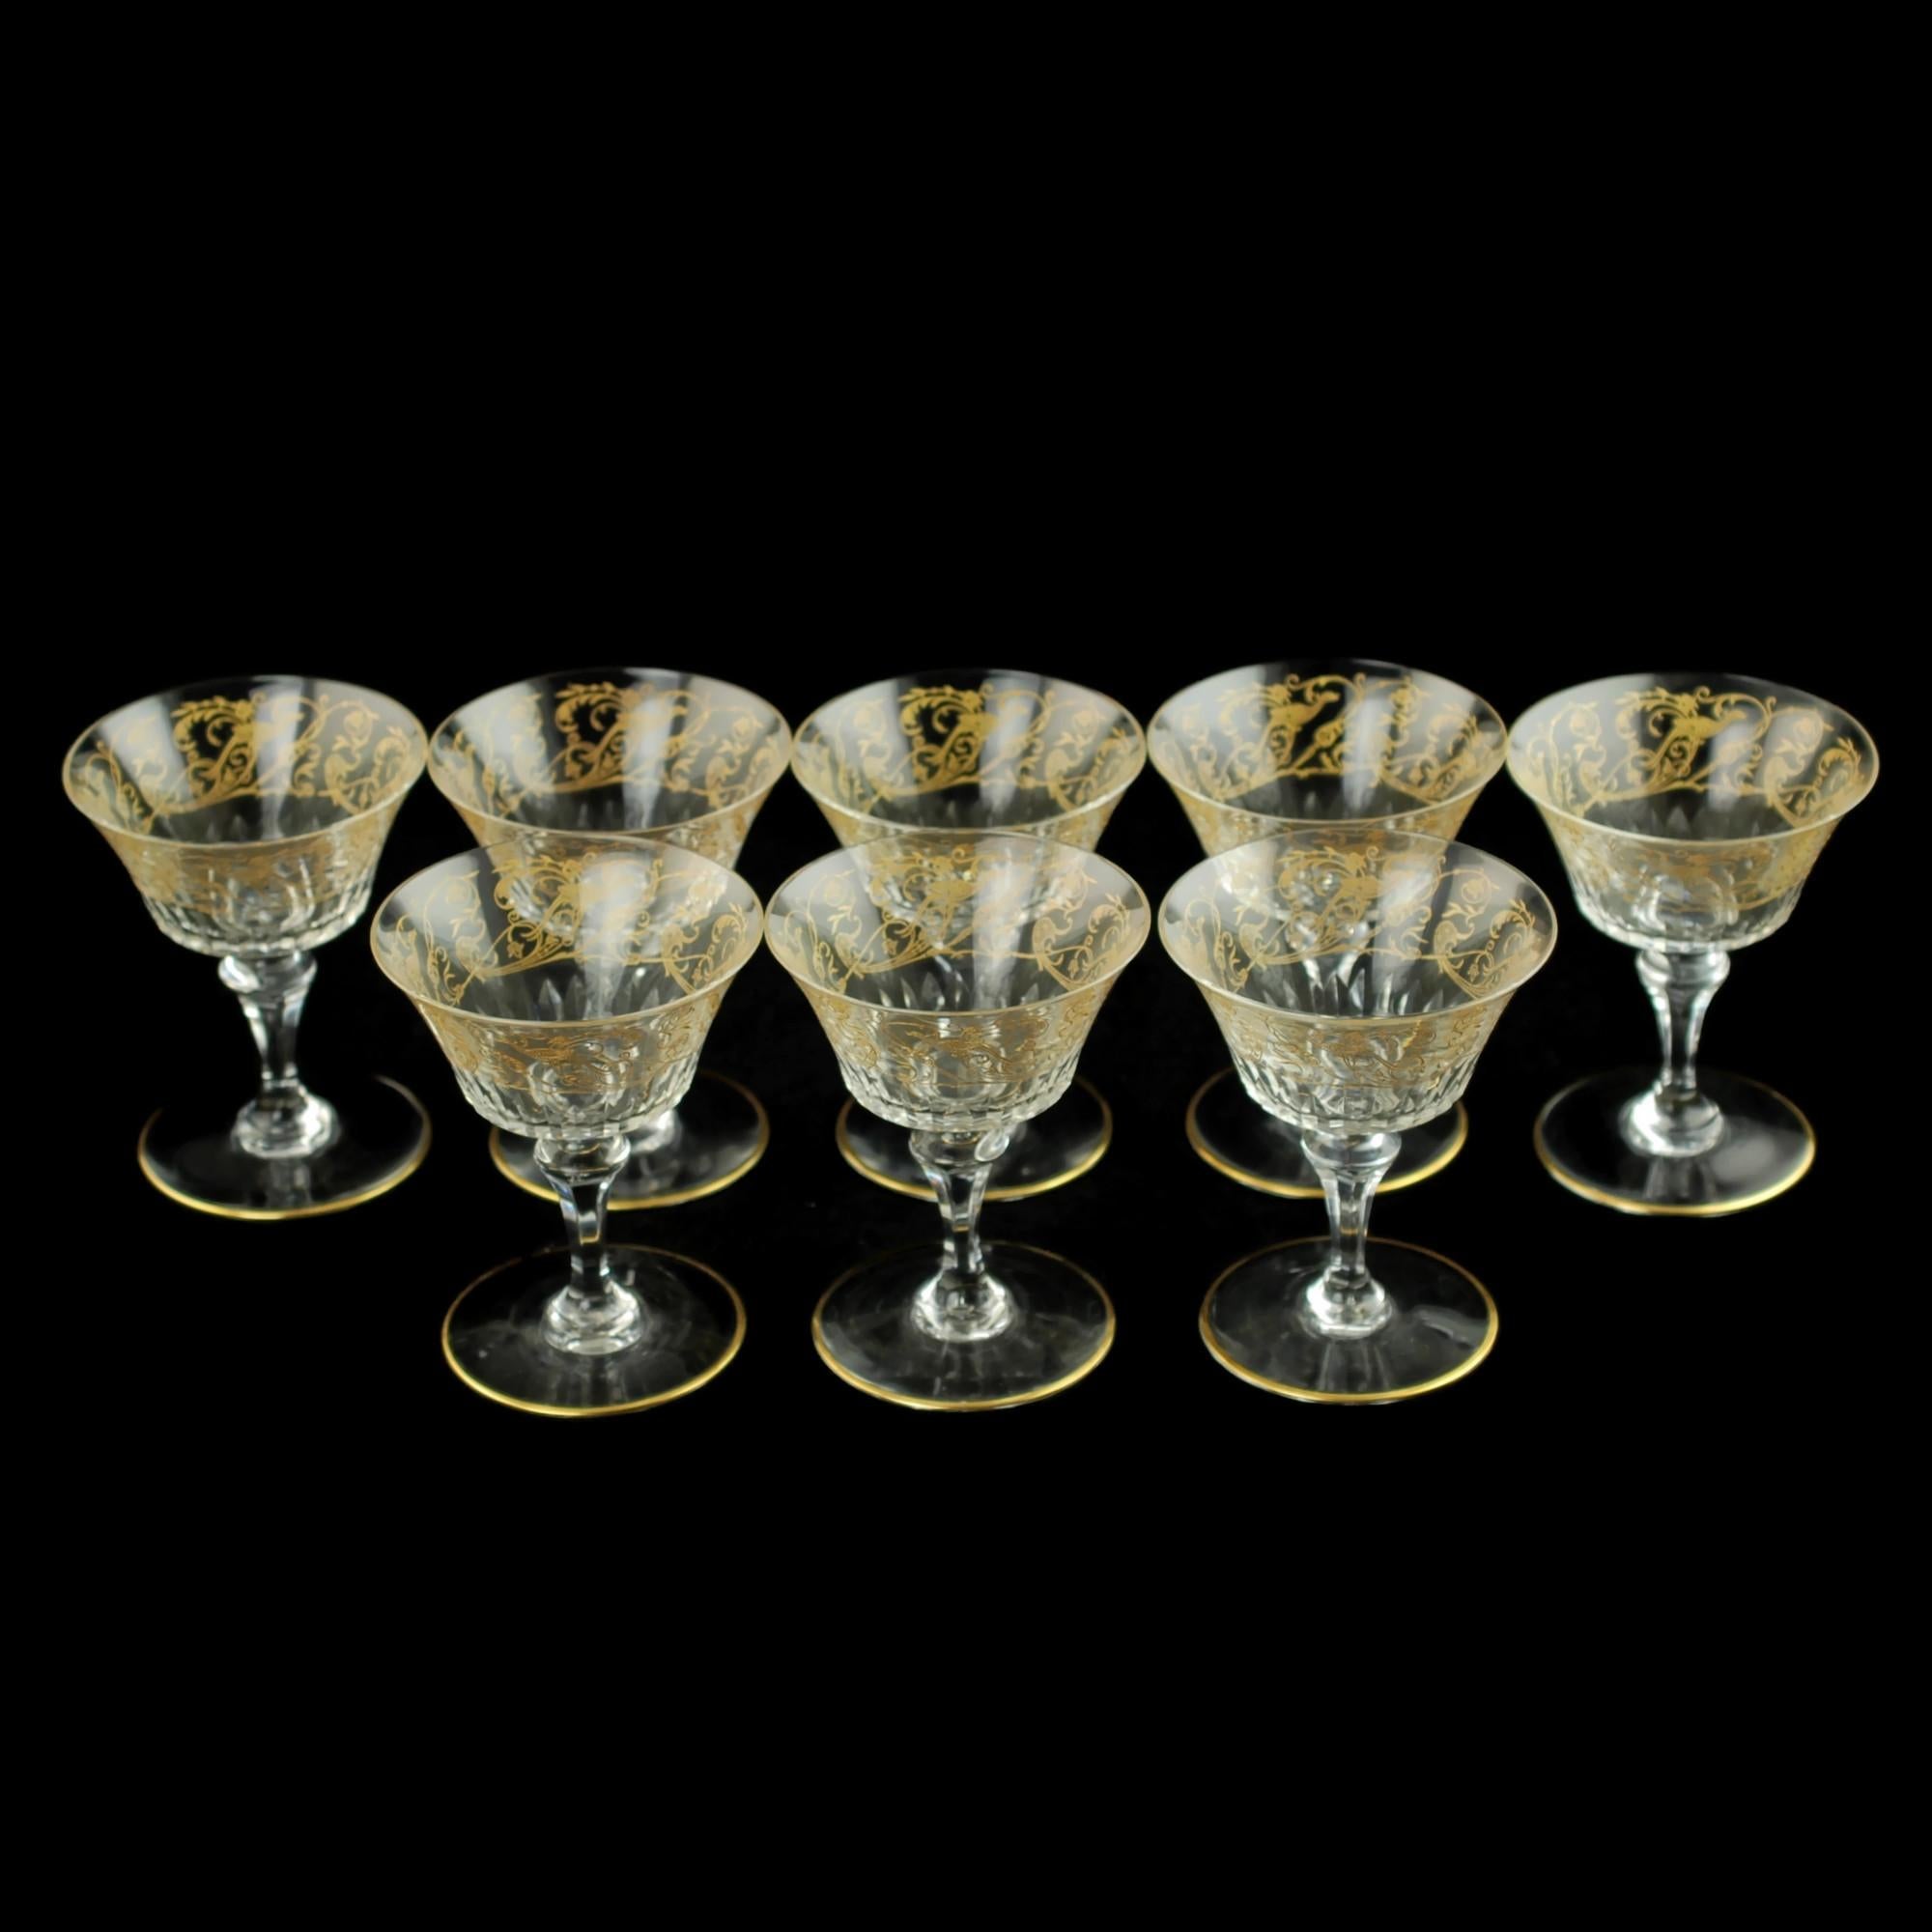 Empire Revival Baccarat Bergame Parme Gilt Etched Crystal Glasses with Paneled Stems Set of 16 For Sale